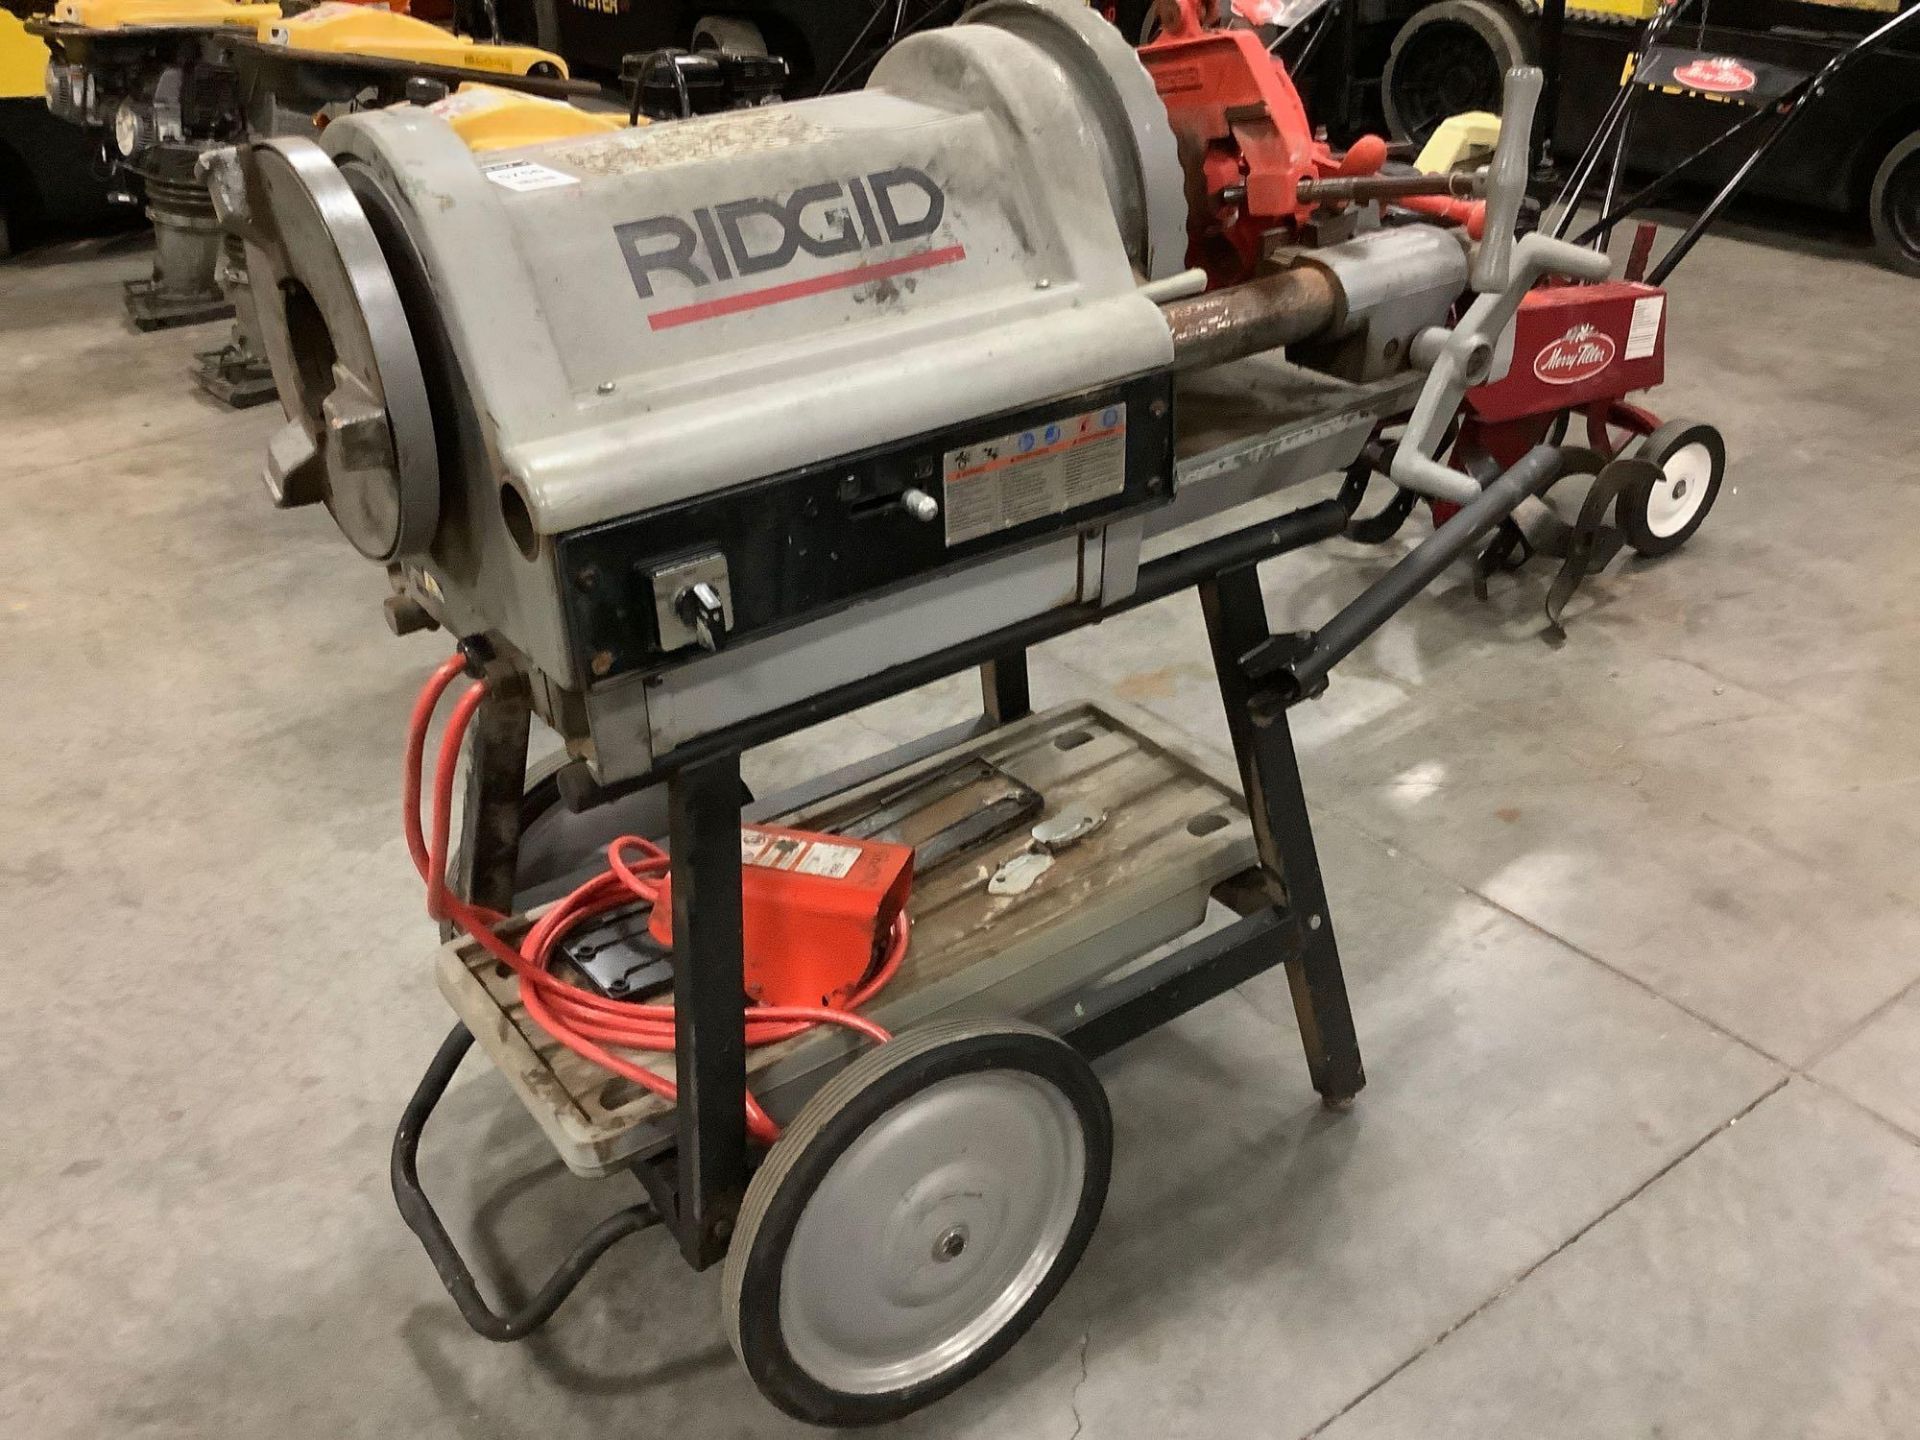 2018 ELECTRIC RIDGID PIPE THREADER MODEL 1224 WITH STAND, APPROX 120 VOLTS,APPROX AMP 15,APPROX HZ 6 - Image 11 of 11